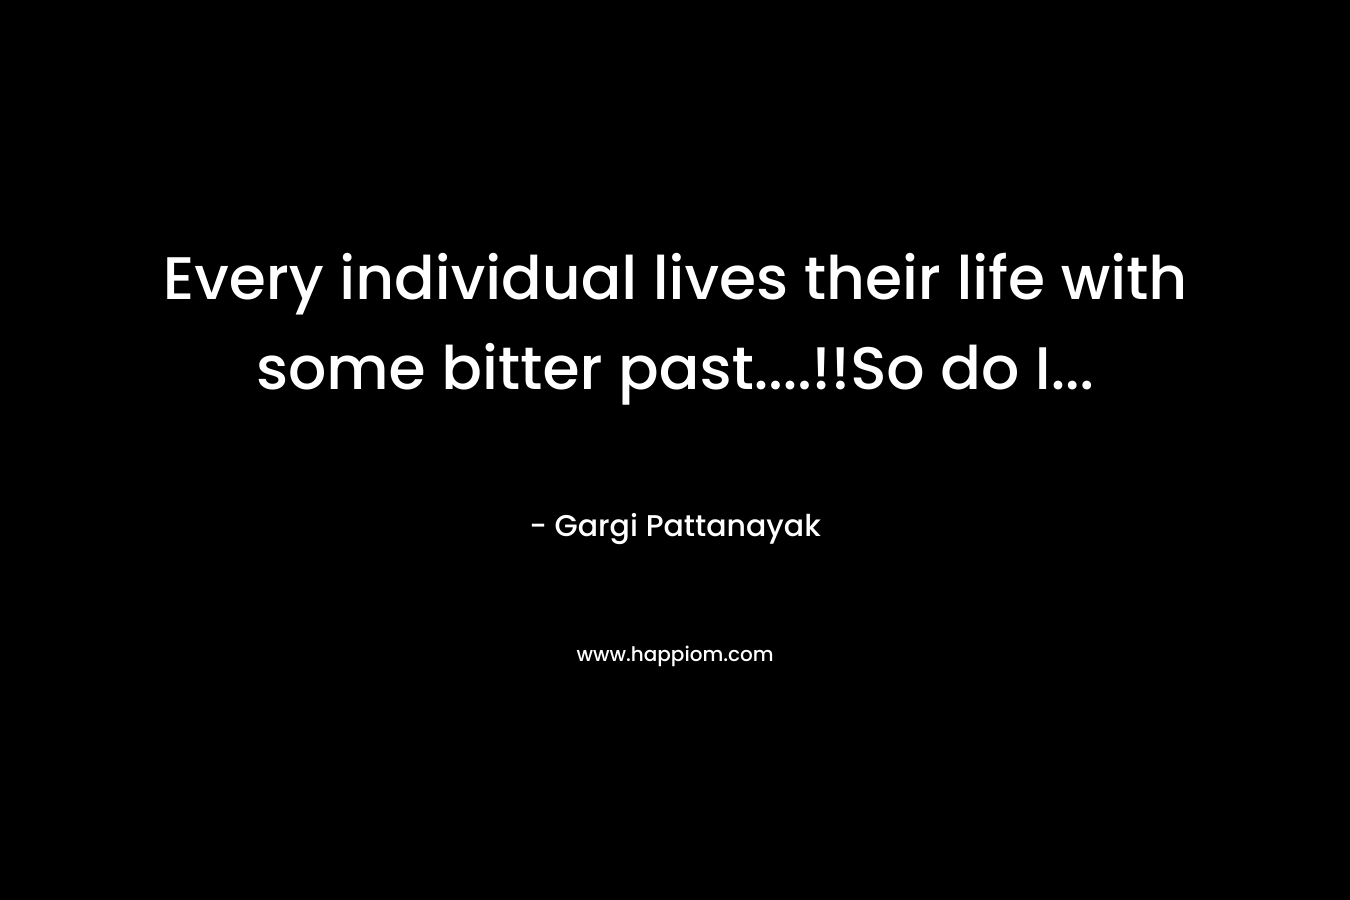 Every individual lives their life with some bitter past....!!So do I...